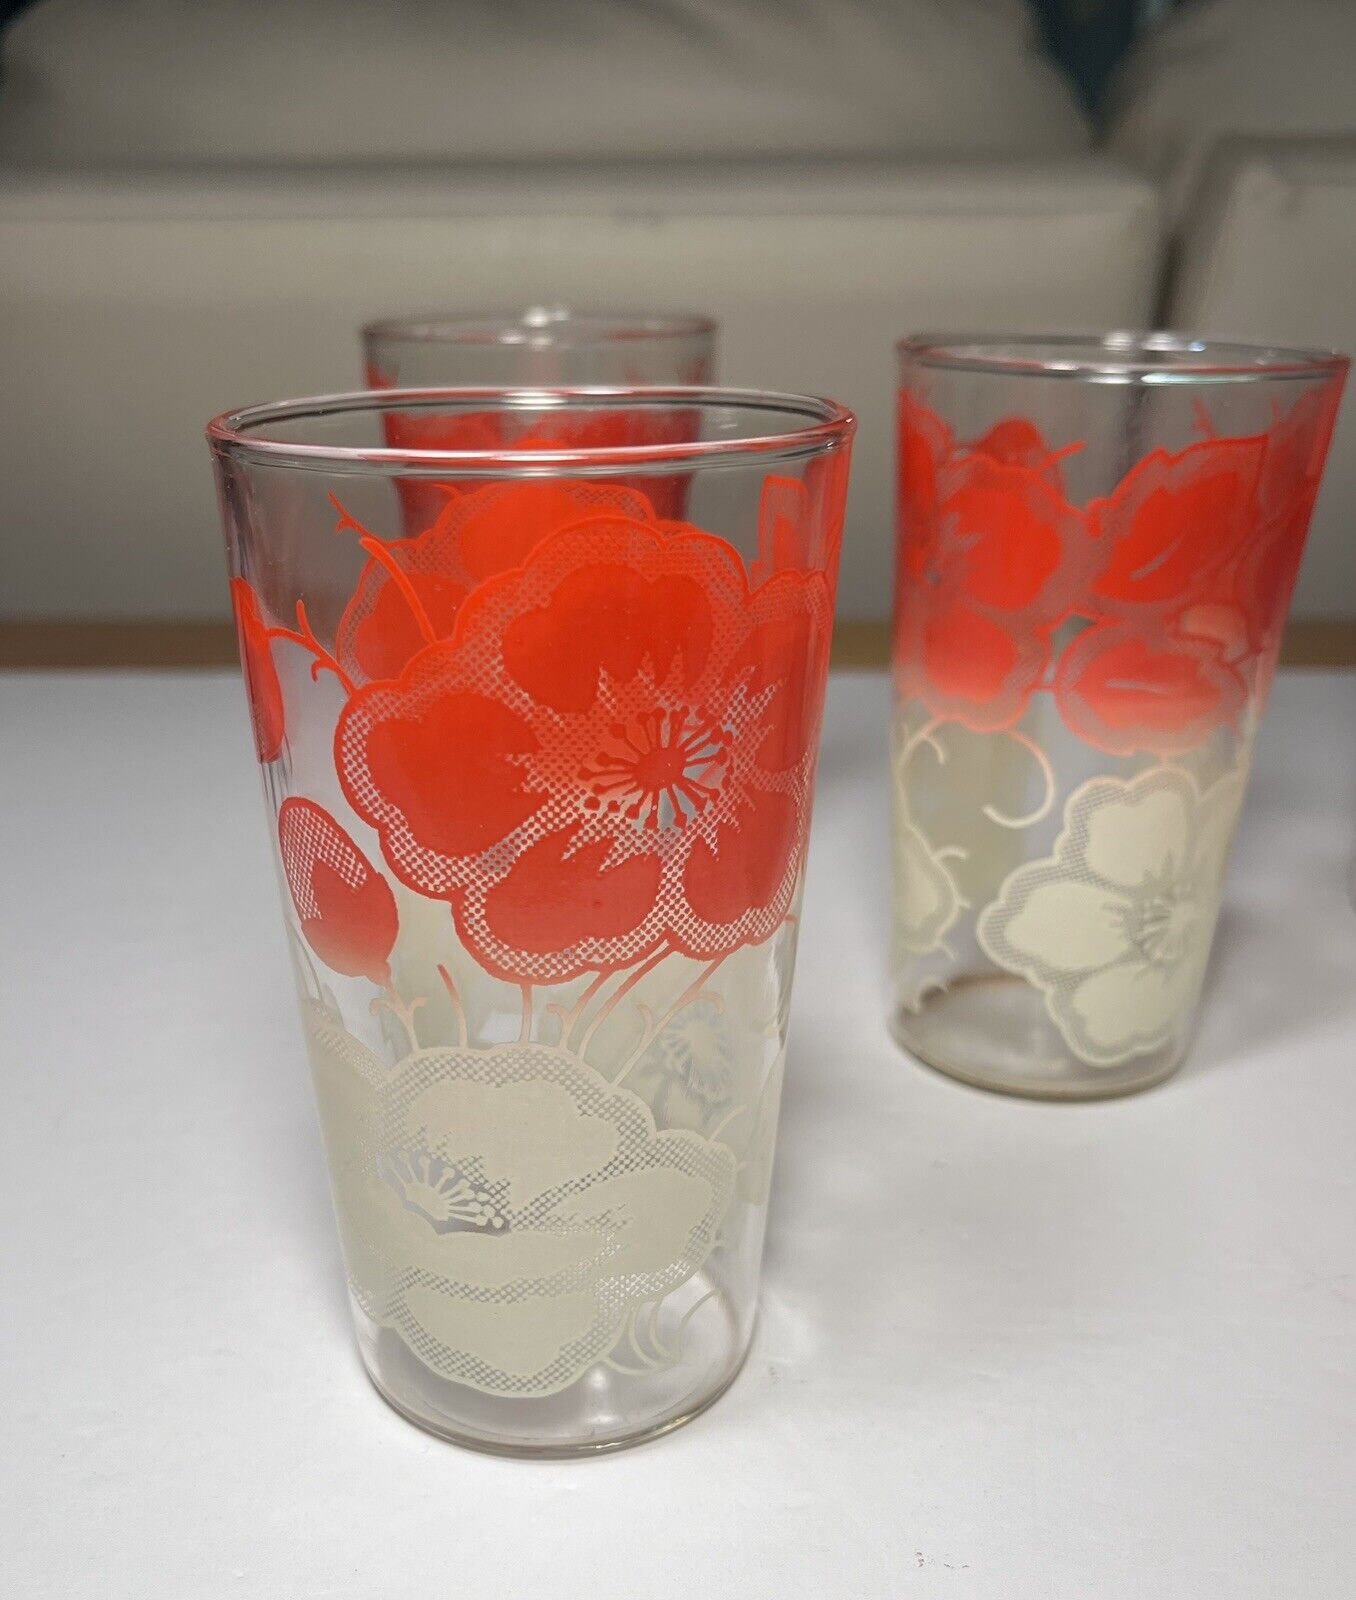 5 Anchor Hocking 1950s Glass Tumblers, Festive Red Over White Hibiscus Pattern